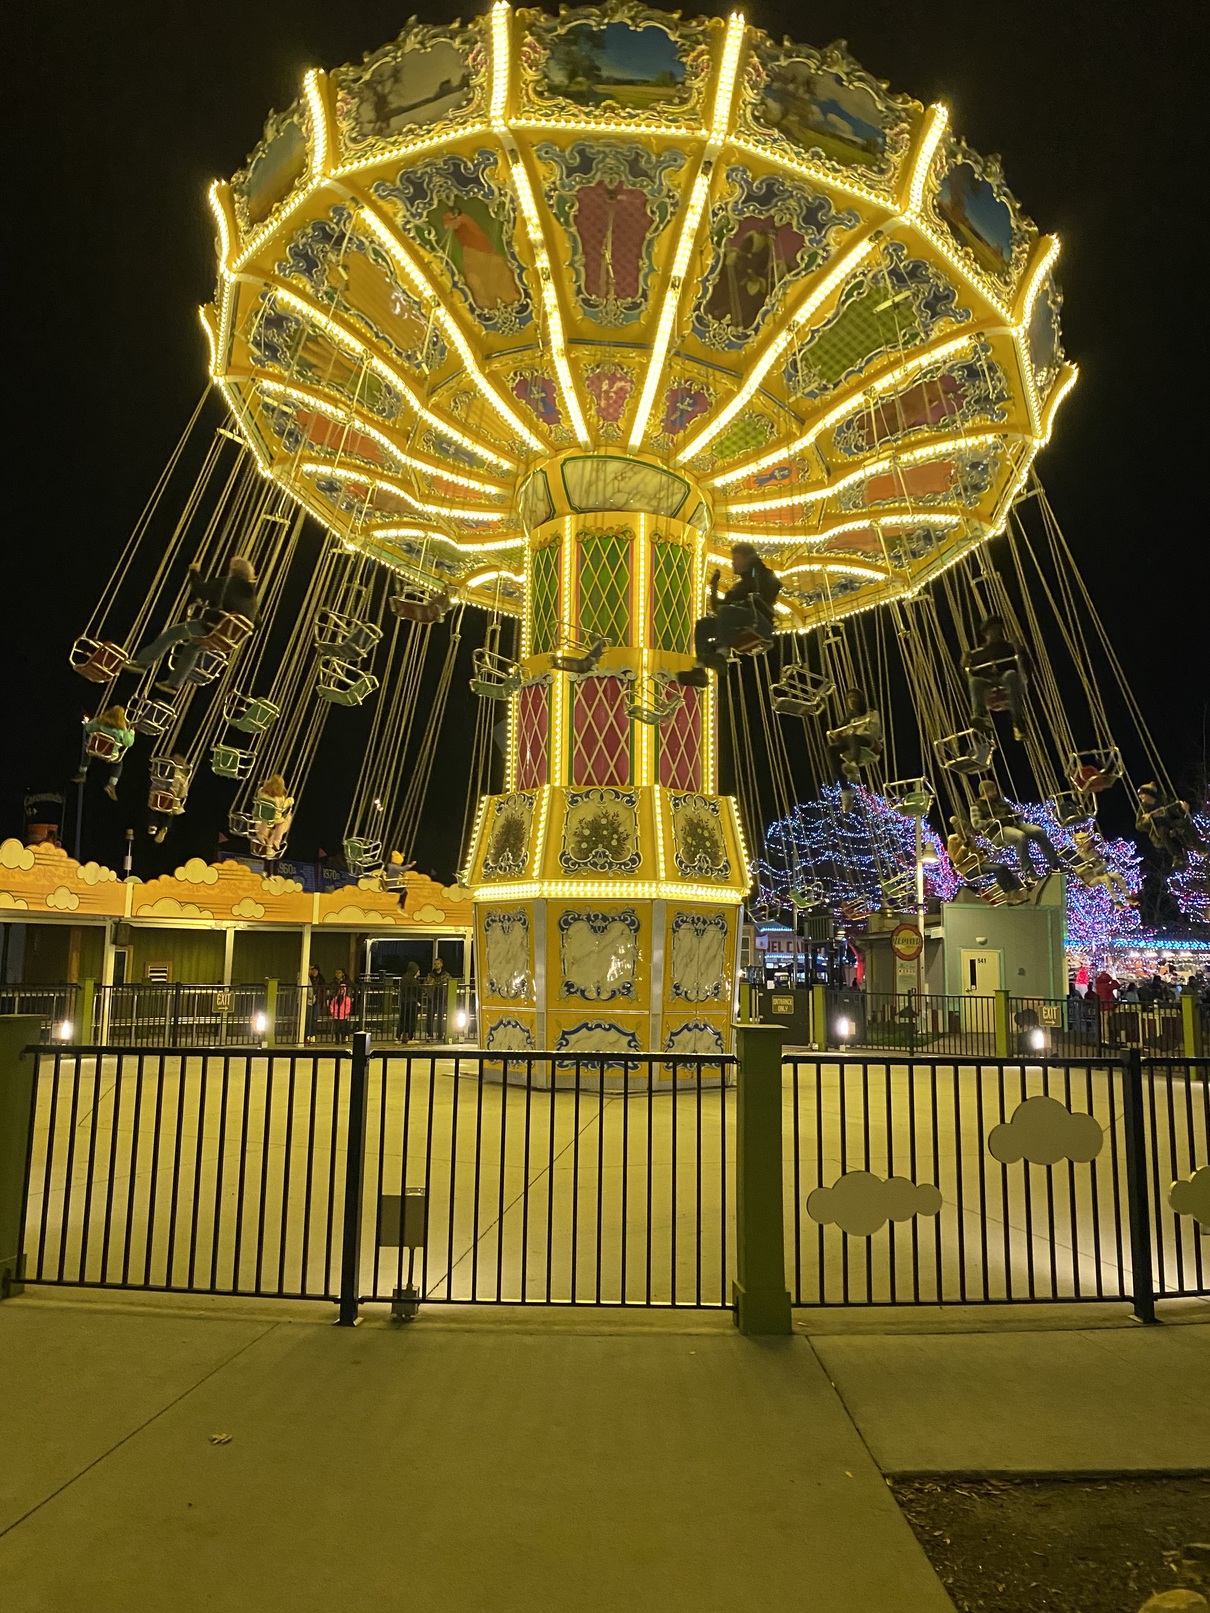 This is the Zephyr swing ride at WinterFest.

